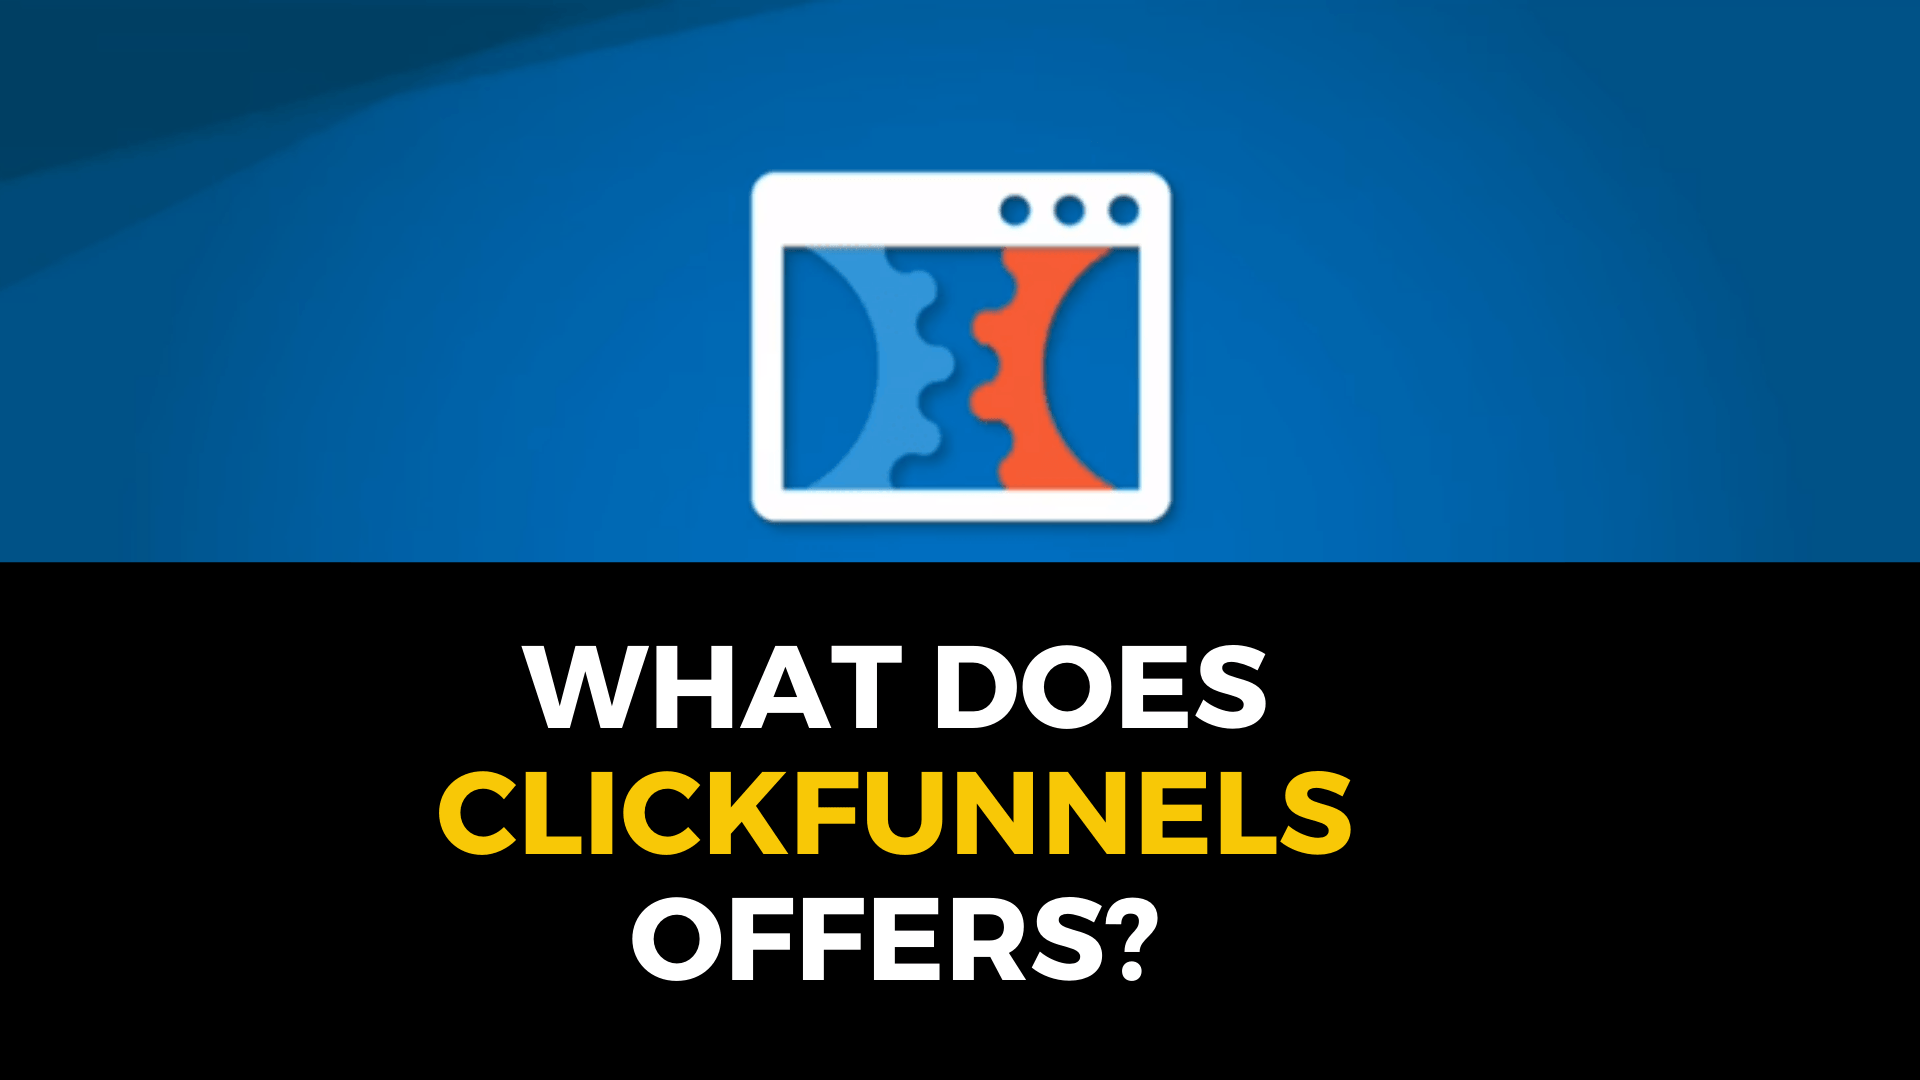 What does ClickFunnels offer?